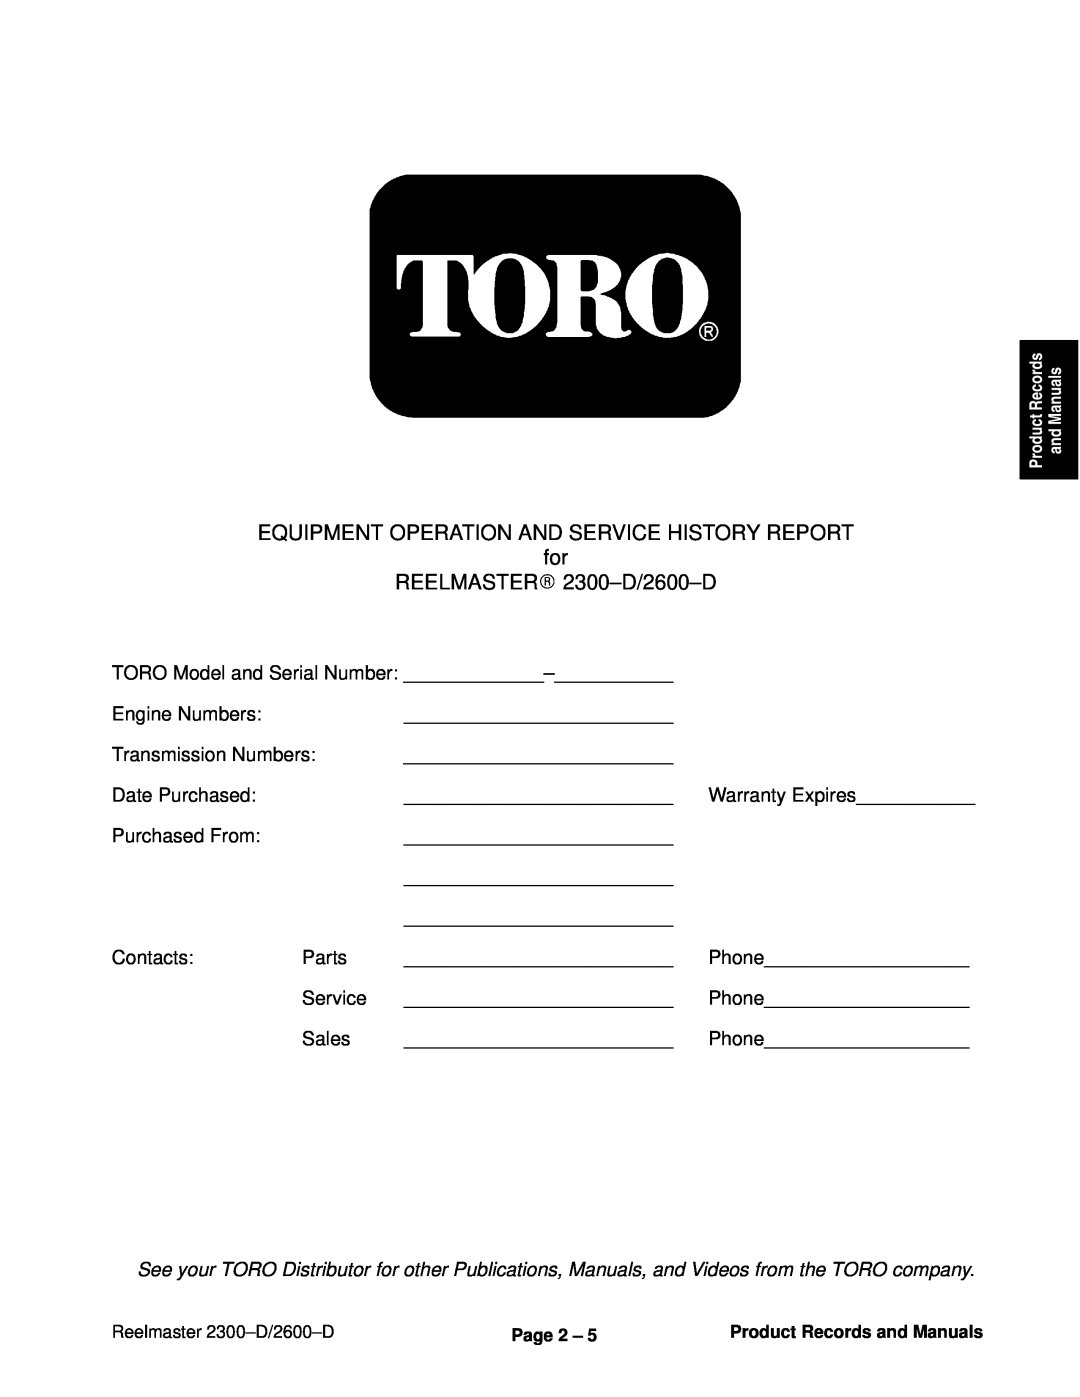 Toro 2600D, 2300-D service manual EQUIPMENT OPERATION AND SERVICE HISTORY REPORT for, REELMASTER 2300±D/2600±D 